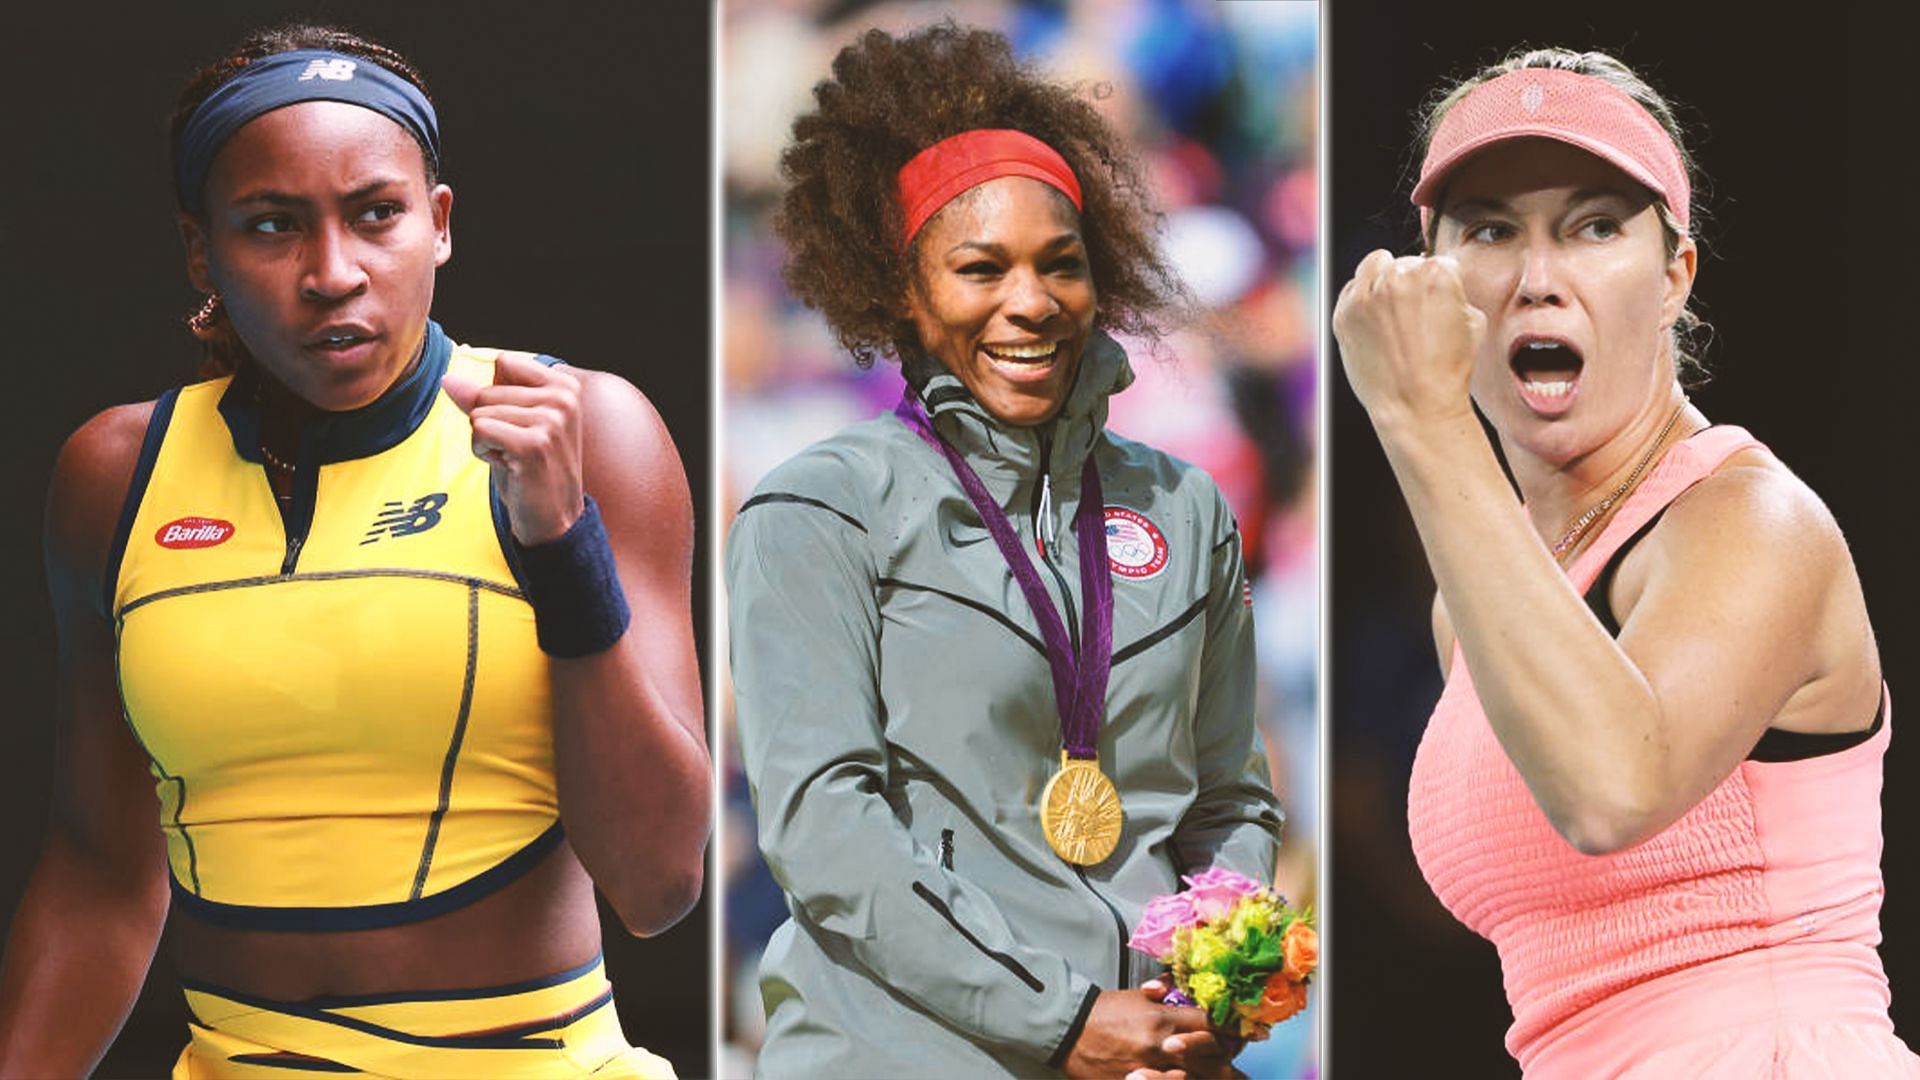 Are Coco Gauff, Danielle Collins & co America's best shot at an Olympic gold medal in tennis since Serena Williams?